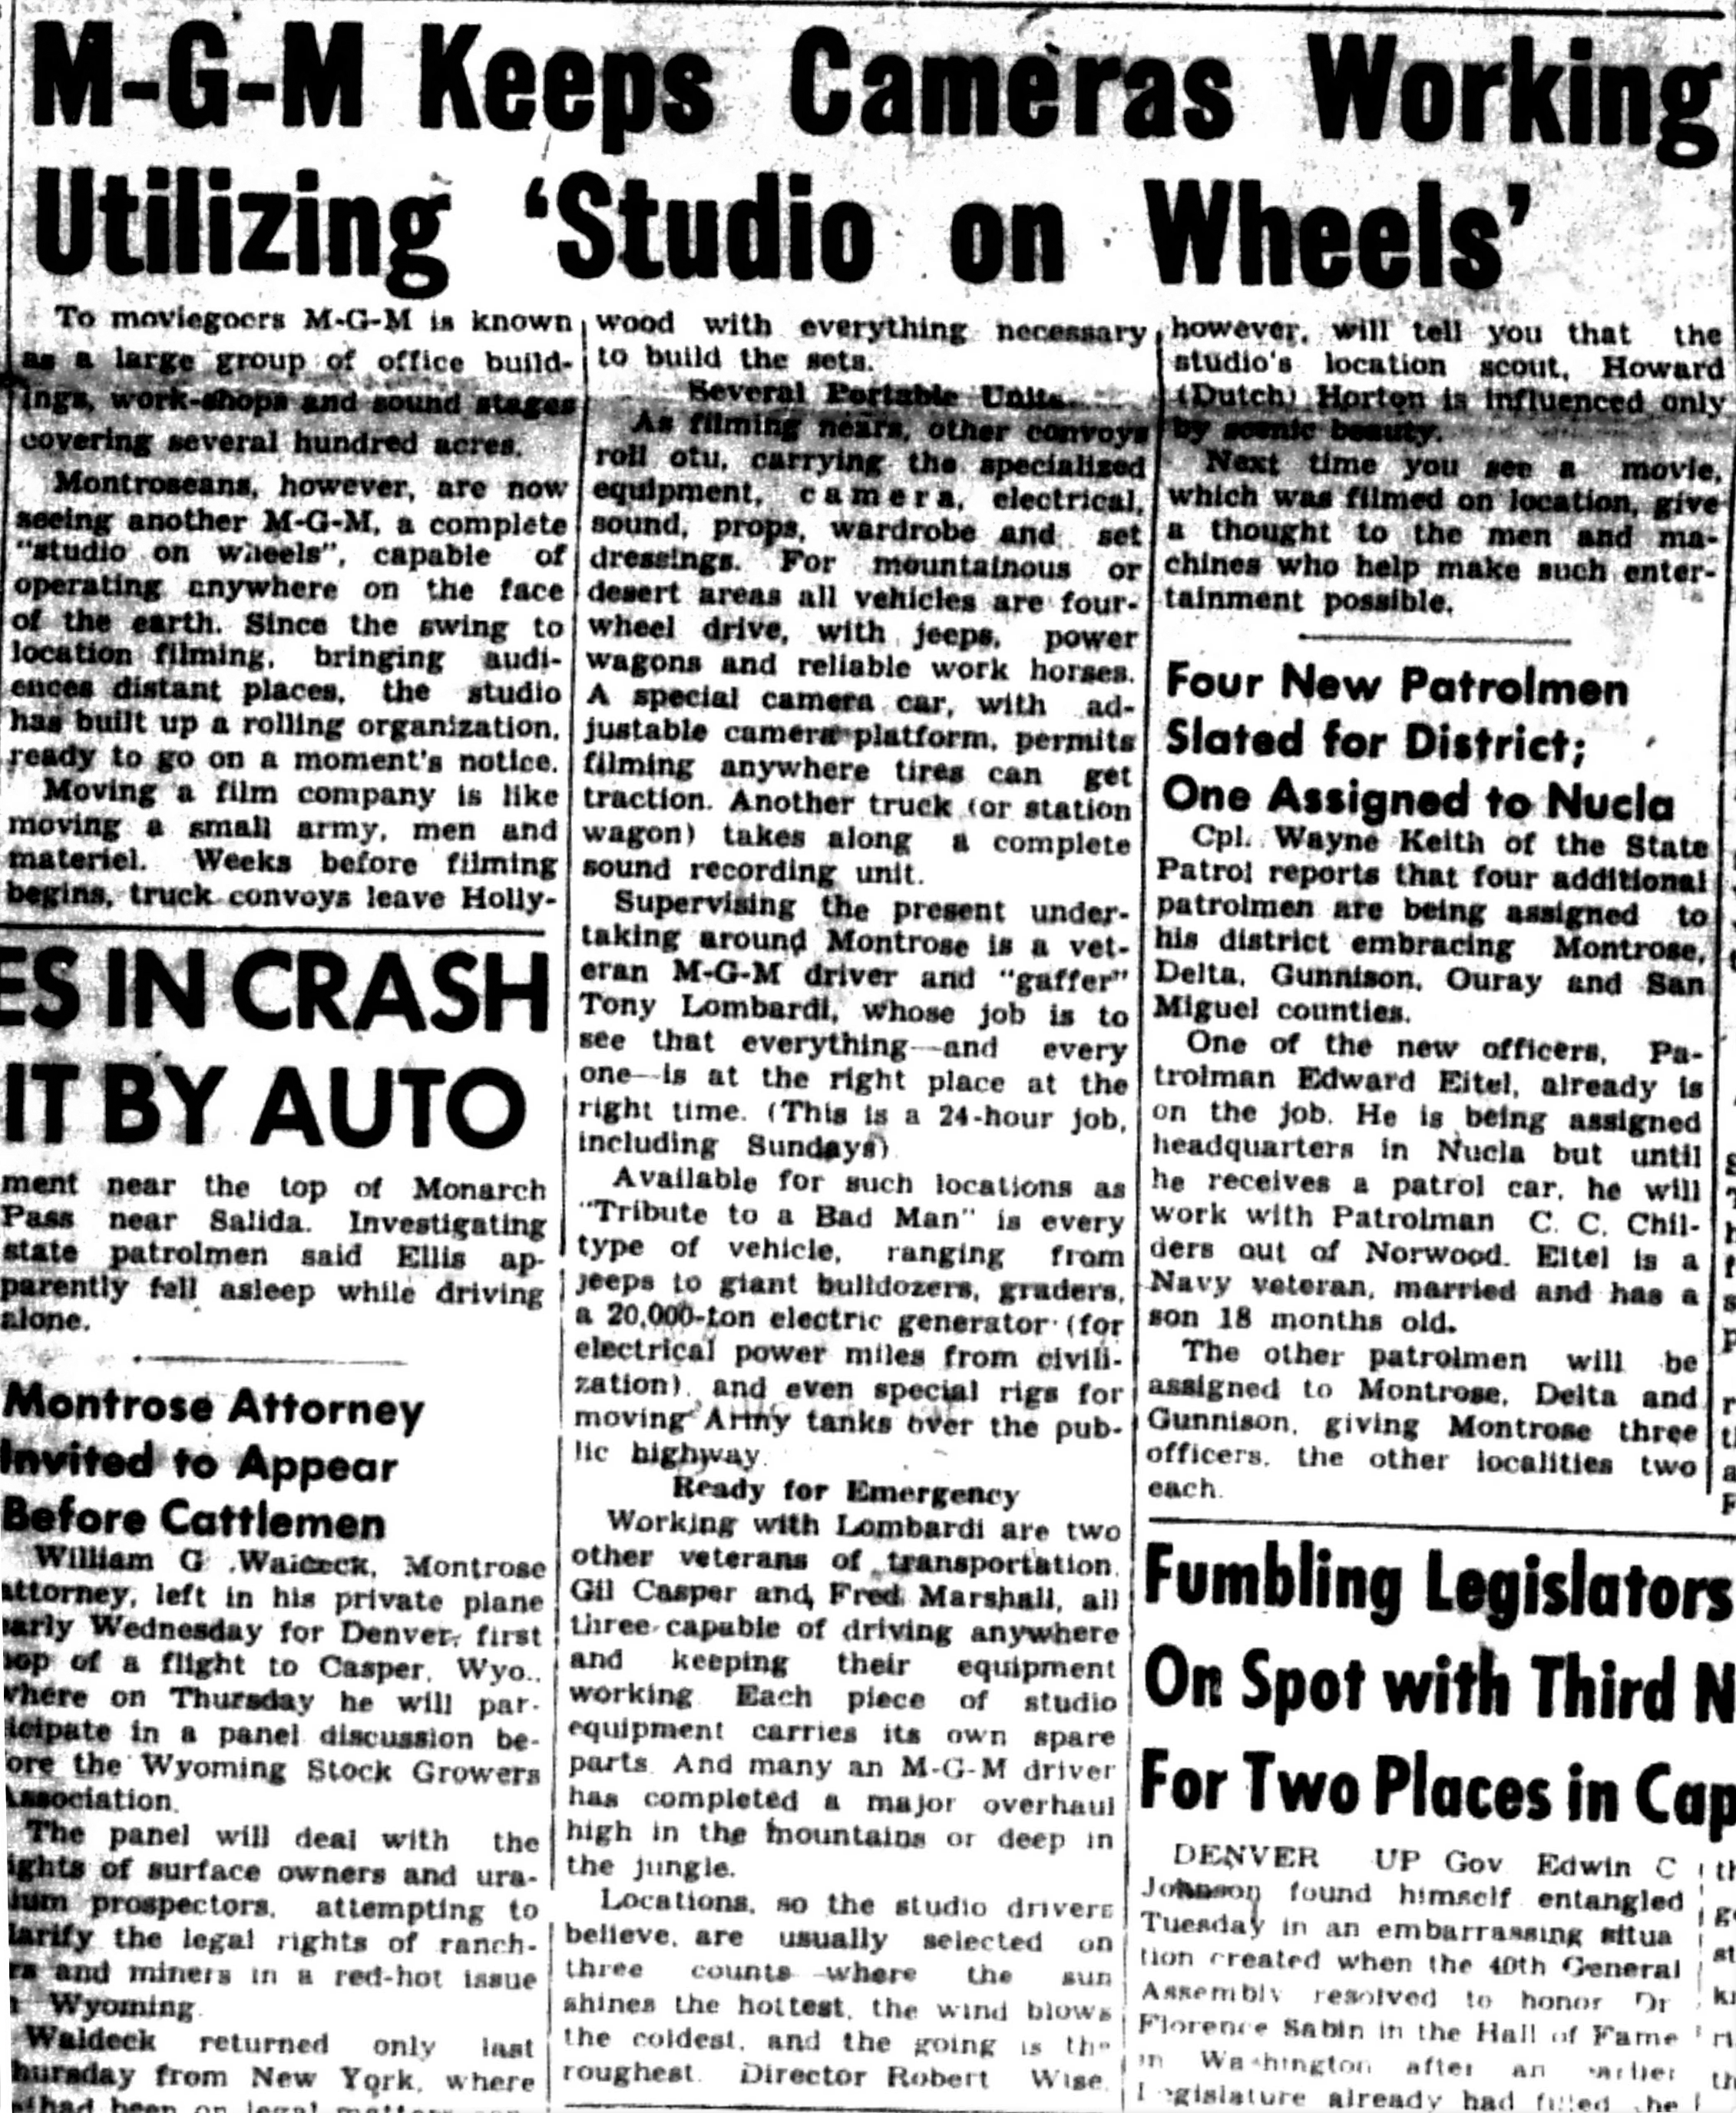   Montrose Daily Press,  Montrose, Colo., Wednesday, June 8, 1955. Courtesy of Adult Services. 